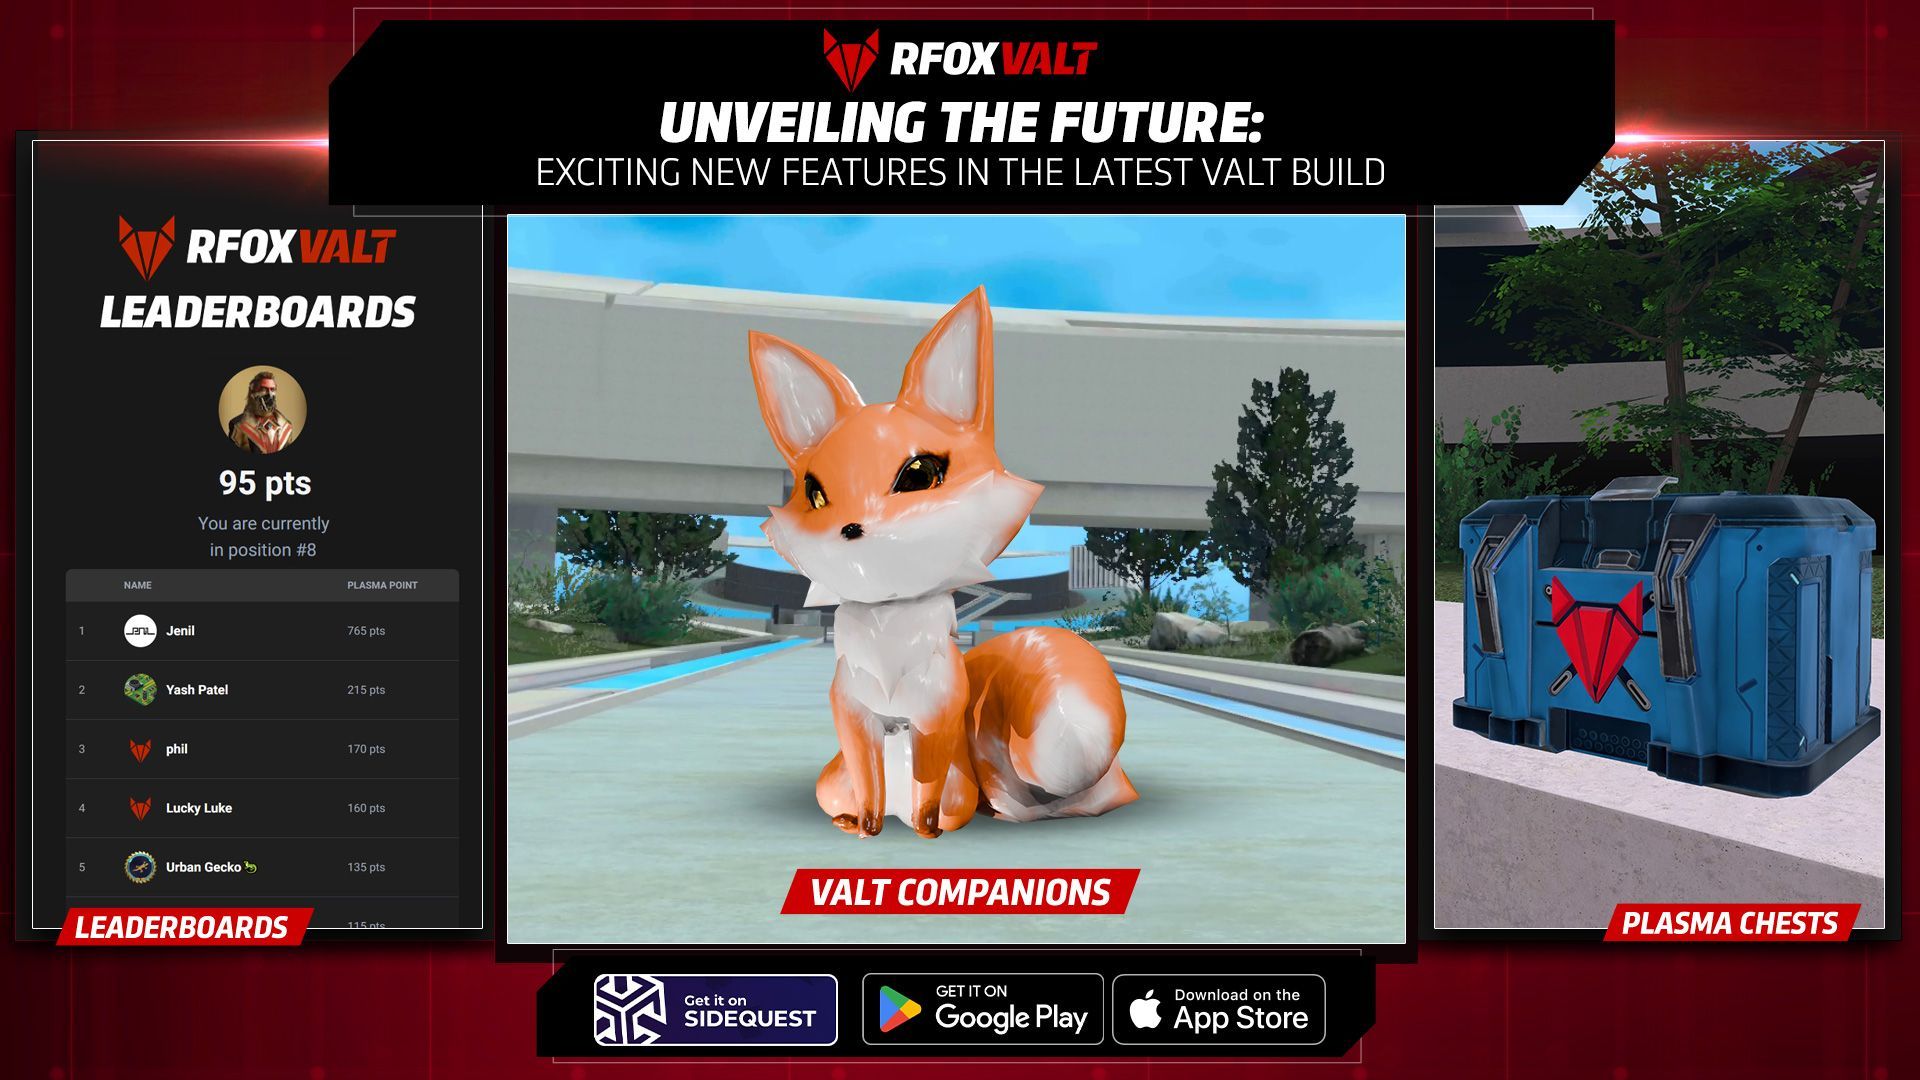 Screenshot of the leaderboards, a FoX companion, and a blue Plasma chest in the RFOX VALT metaverse